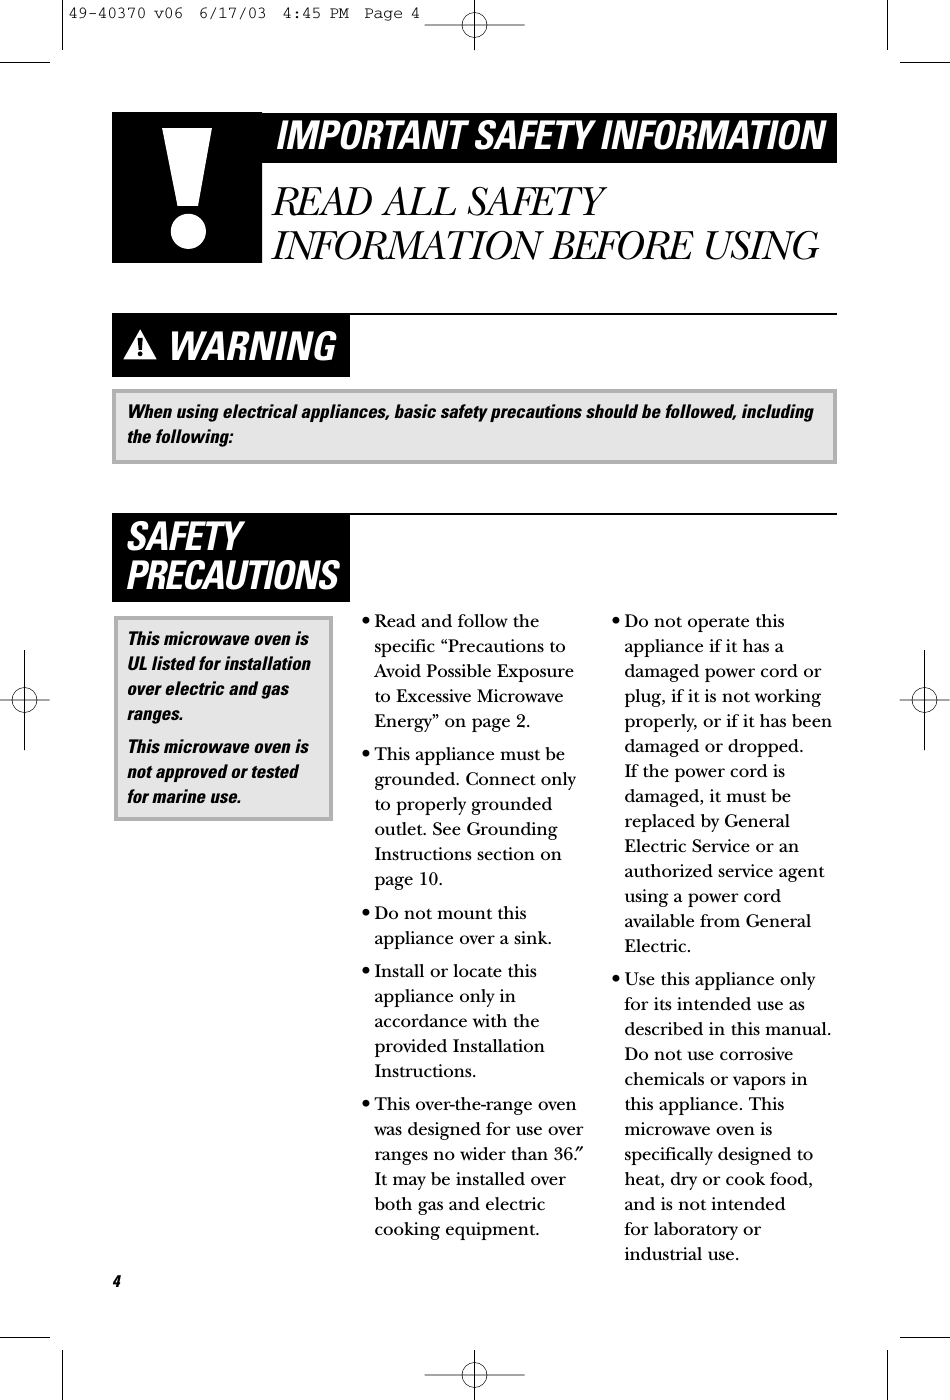 When using electrical appliances, basic safety precautions should be followed, includingthe following:WARNING•Read and follow thespecific “Precautions toAvoid Possible Exposureto Excessive MicrowaveEnergy” on page 2.•This appliance must begrounded. Connect onlyto properly groundedoutlet. See GroundingInstructions section onpage 10.•Do not mount thisappliance over a sink. •Install or locate thisappliance only inaccordance with theprovided InstallationInstructions.•This over-the-range ovenwas designed for use overranges no wider than 36.″It may be installed overboth gas and electriccooking equipment.•Do not operate thisappliance if it has adamaged power cord orplug, if it is not workingproperly, or if it has beendamaged or dropped. If the power cord isdamaged, it must bereplaced by GeneralElectric Service or anauthorized service agentusing a power cordavailable from GeneralElectric.•Use this appliance onlyfor its intended use asdescribed in this manual.Do not use corrosivechemicals or vapors inthis appliance. Thismicrowave oven isspecifically designed toheat, dry or cook food,and is not intended for laboratory orindustrial use.This microwave oven isUL listed for installationover electric and gasranges.This microwave oven isnot approved or testedfor marine use.SAFETYPRECAUTIONS4IMPORTANT SAFETY INFORMATIONREAD ALL SAFETYINFORMATION BEFORE USING49-40370 v06  6/17/03  4:45 PM  Page 4